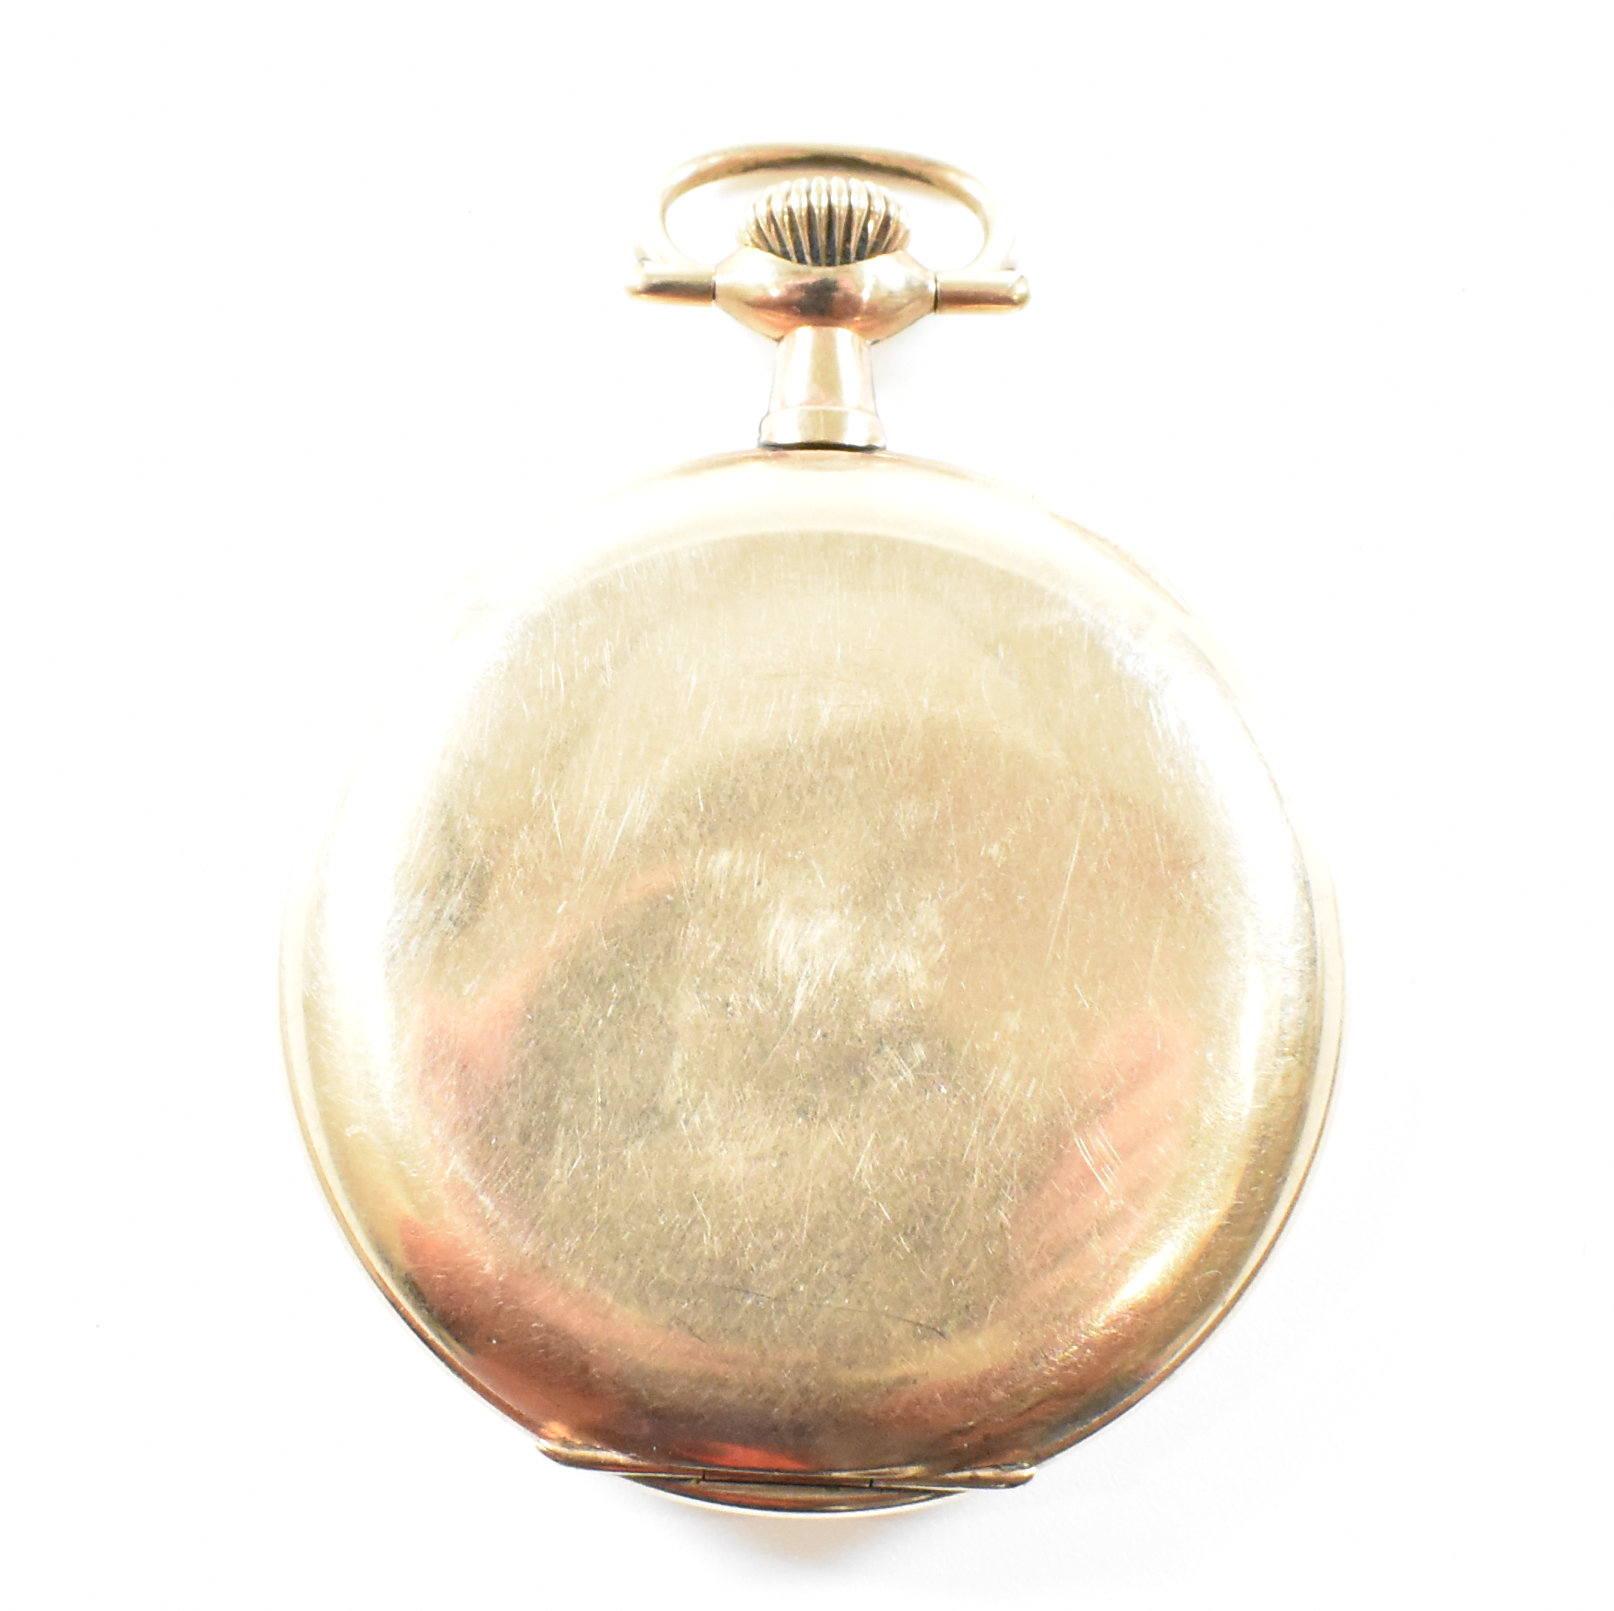 ROLEX LEVER SWISS MADE YELLOW METAL POCKET WATCH - Image 2 of 7